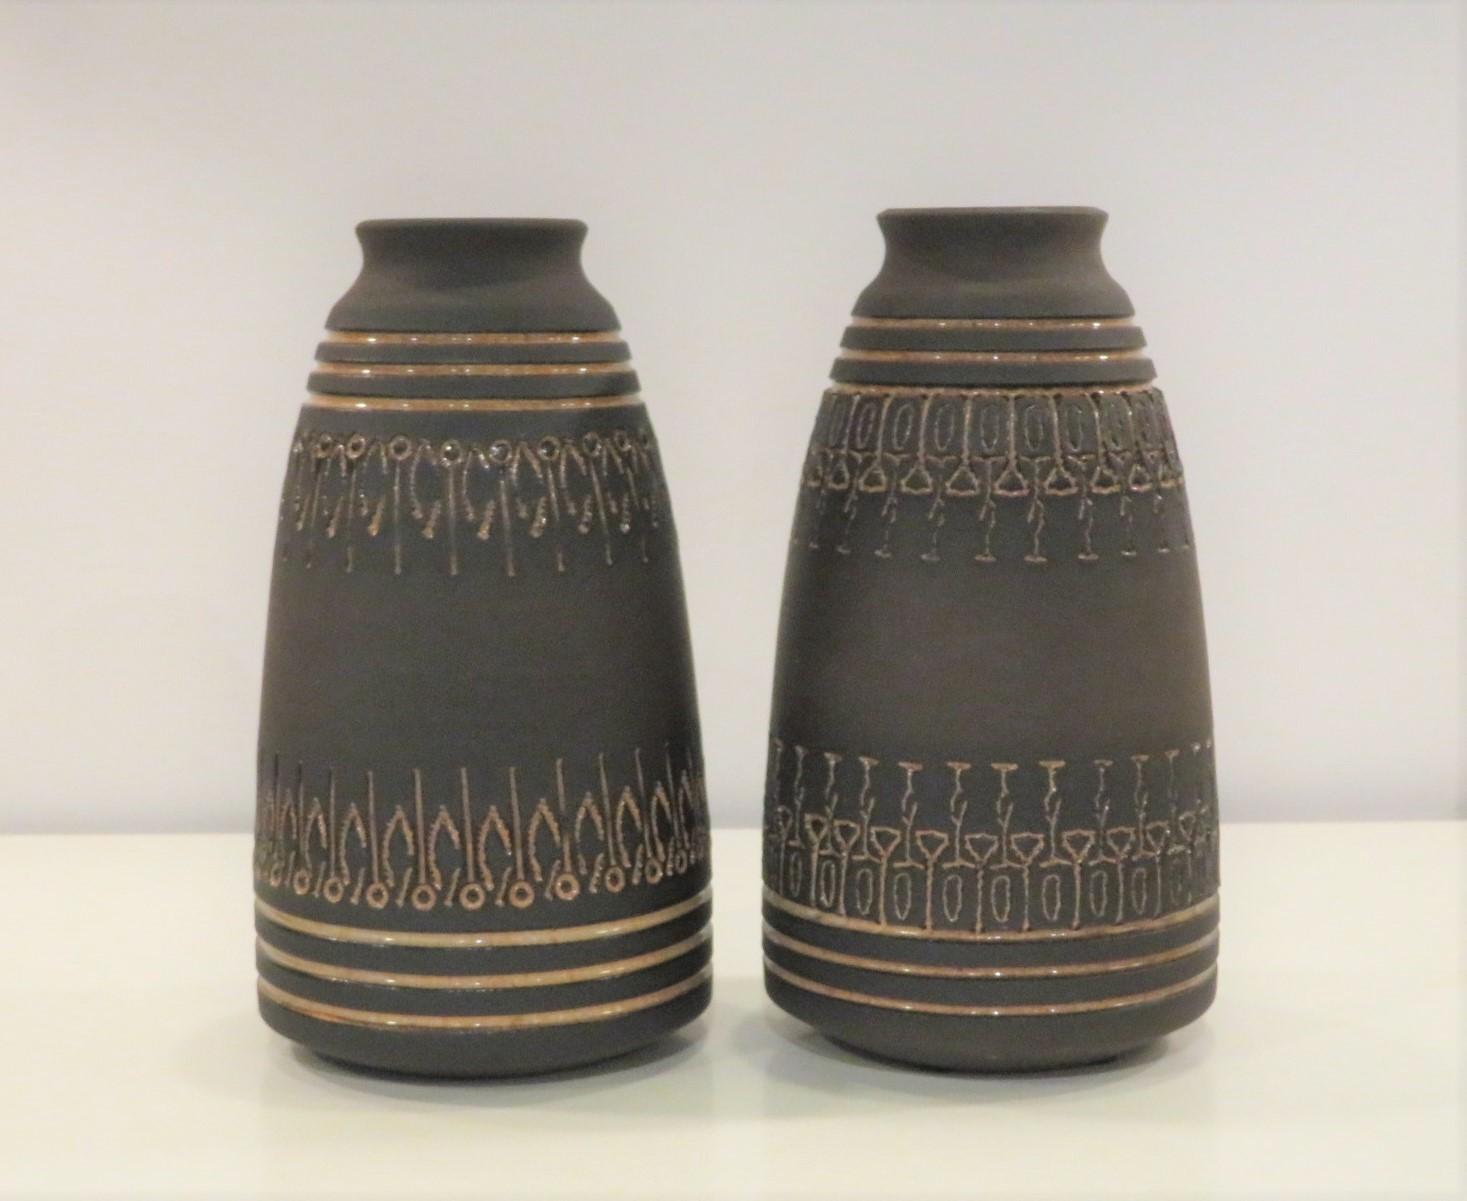 This grouping of 5 stoneware pieces by Ulla Winblad was produced from the late 50s (weed pot) through the early 1960s. These are all handmade unique pieces with sgraffito design. Three pieces are without a glaze, emphasizing the rustic feel of the